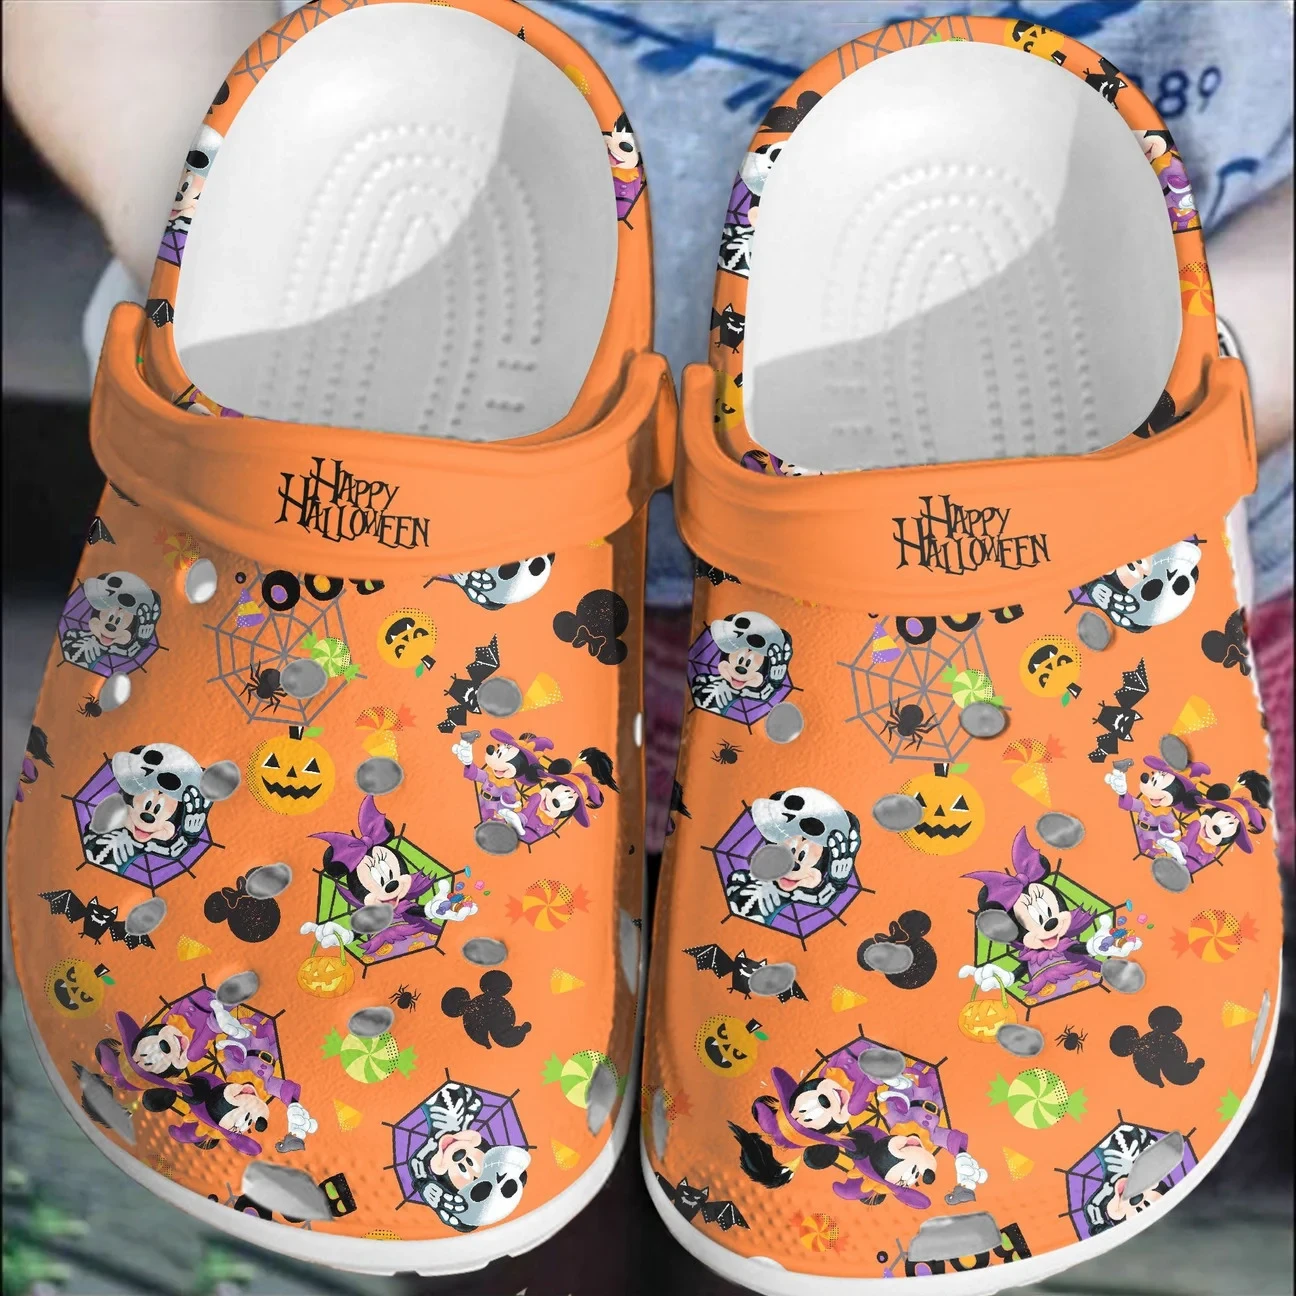 Happy Halloween Mickey Mouse Crocs Classic Clogs Shoes PANCR1184